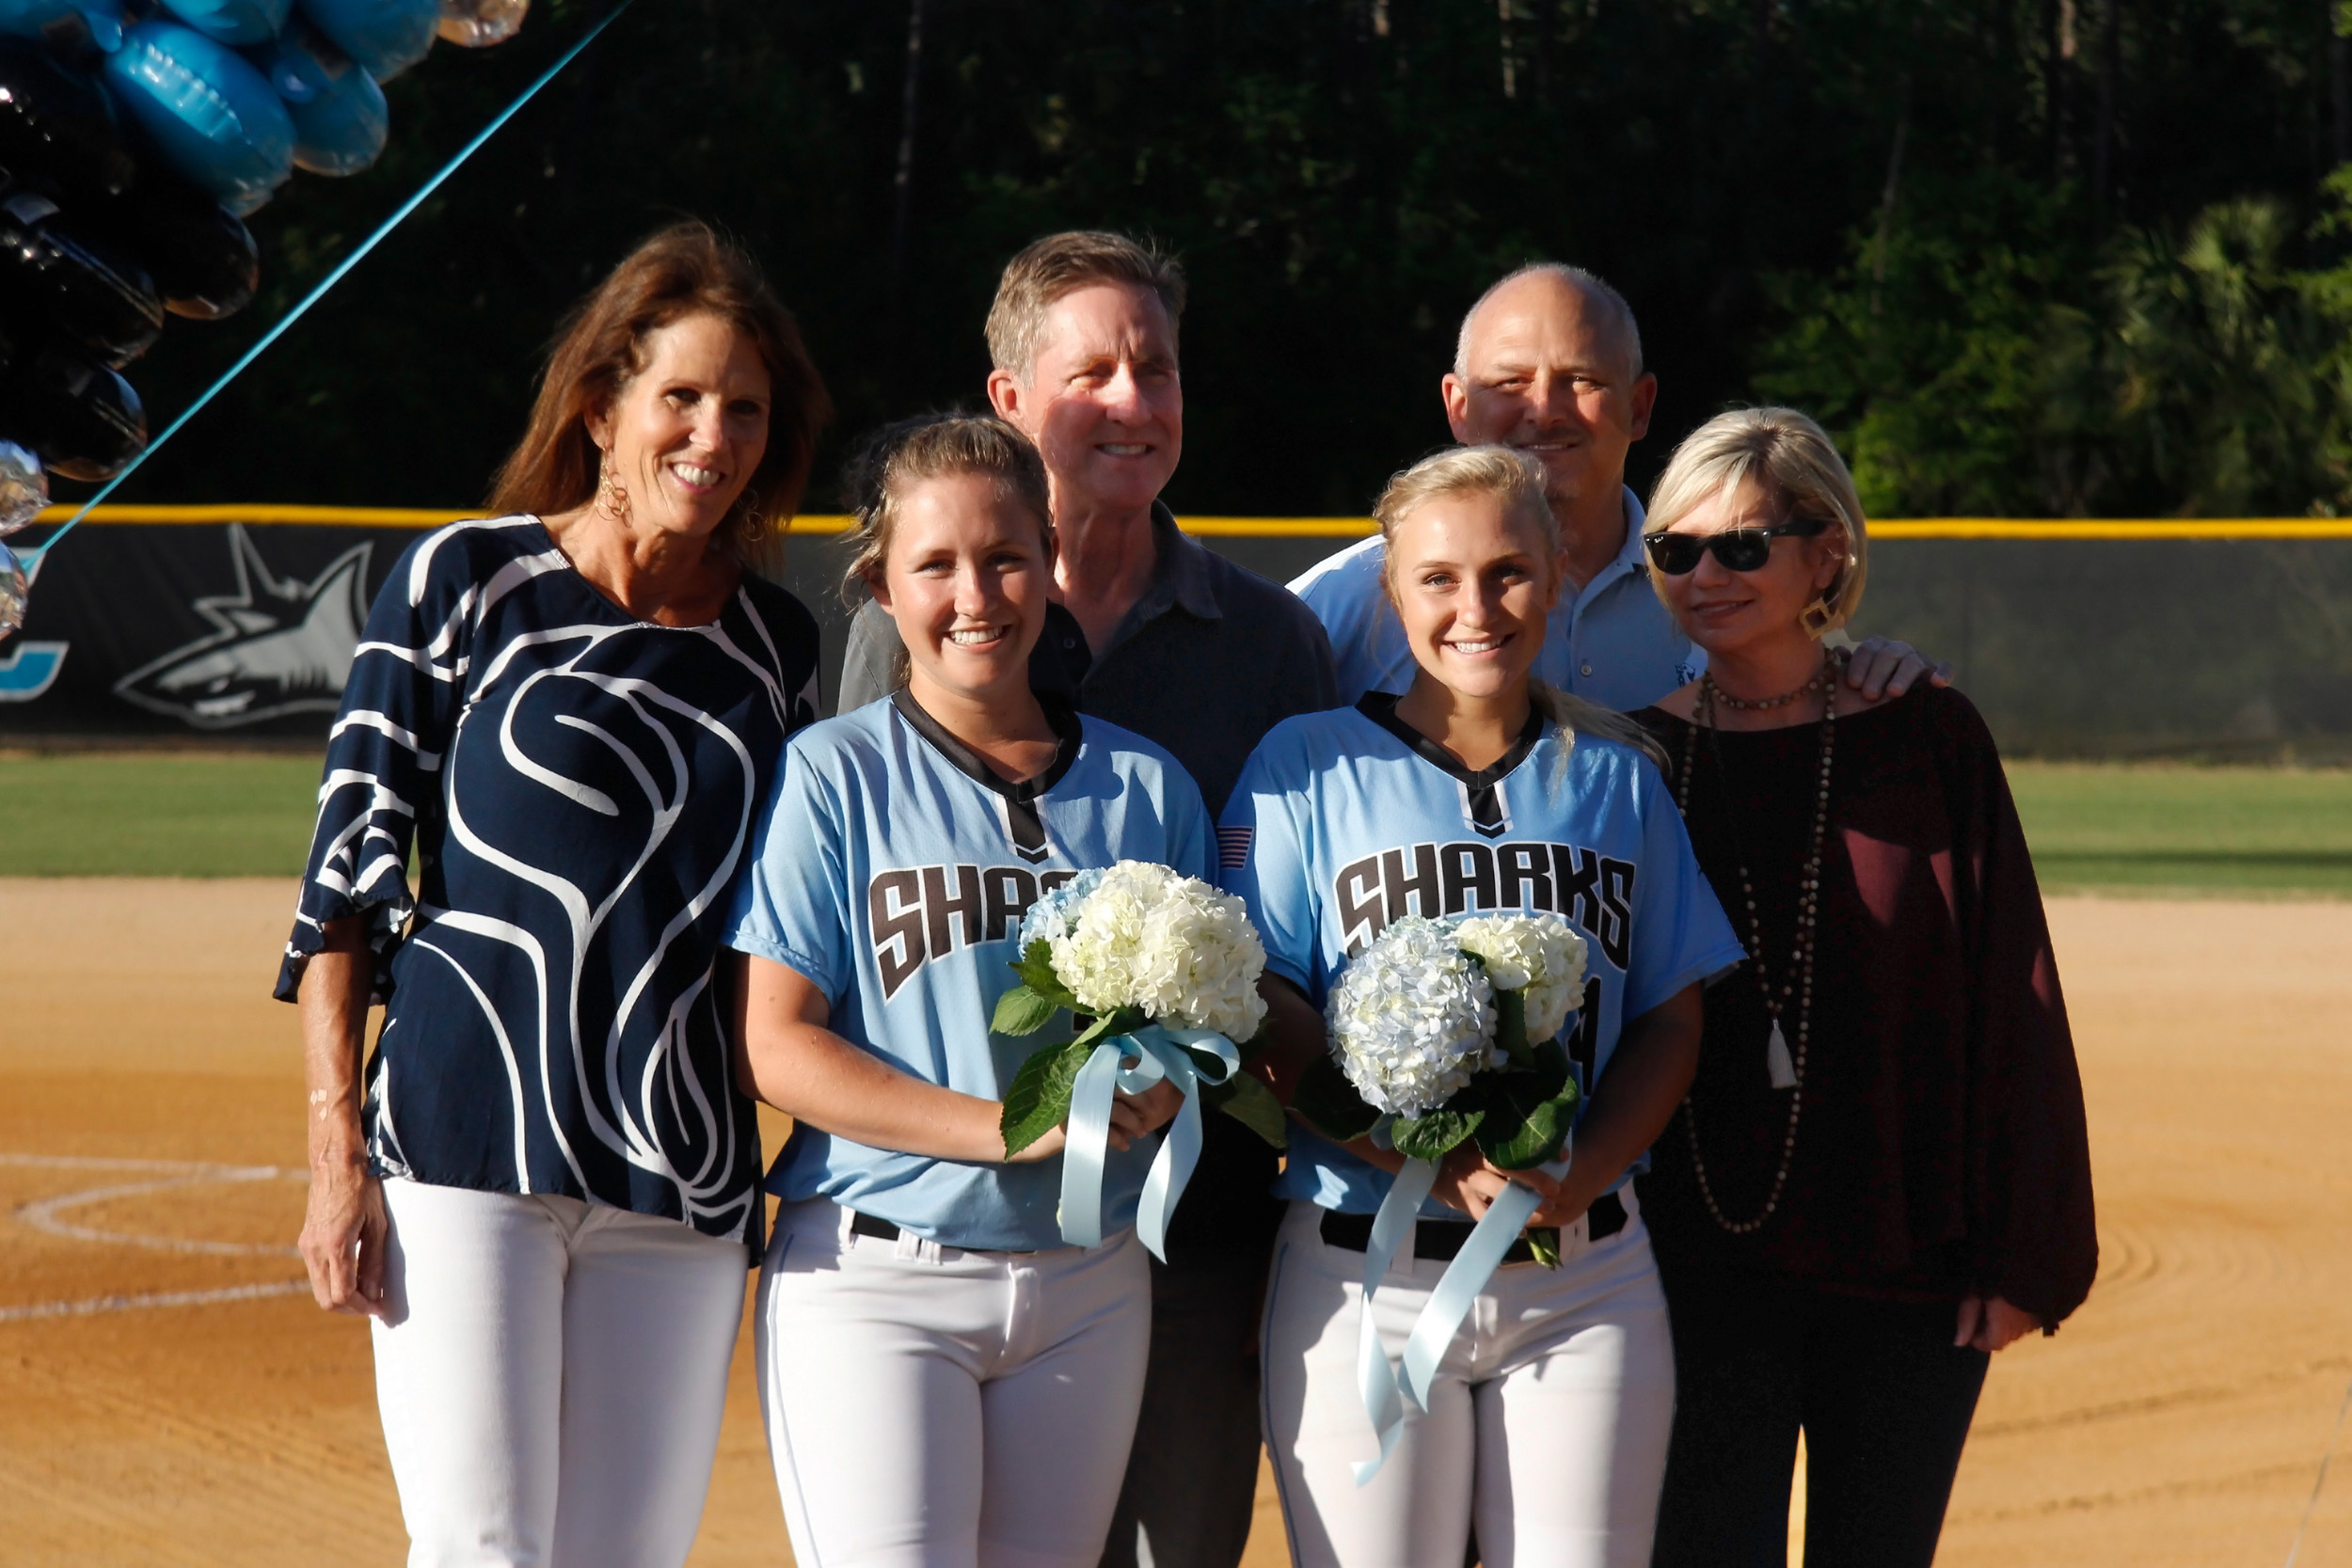 Farley Callaghan (left) and Taylor Bradshaw and their parents were honored at the Senior Night ceremony before the game against Pedro Menendez.